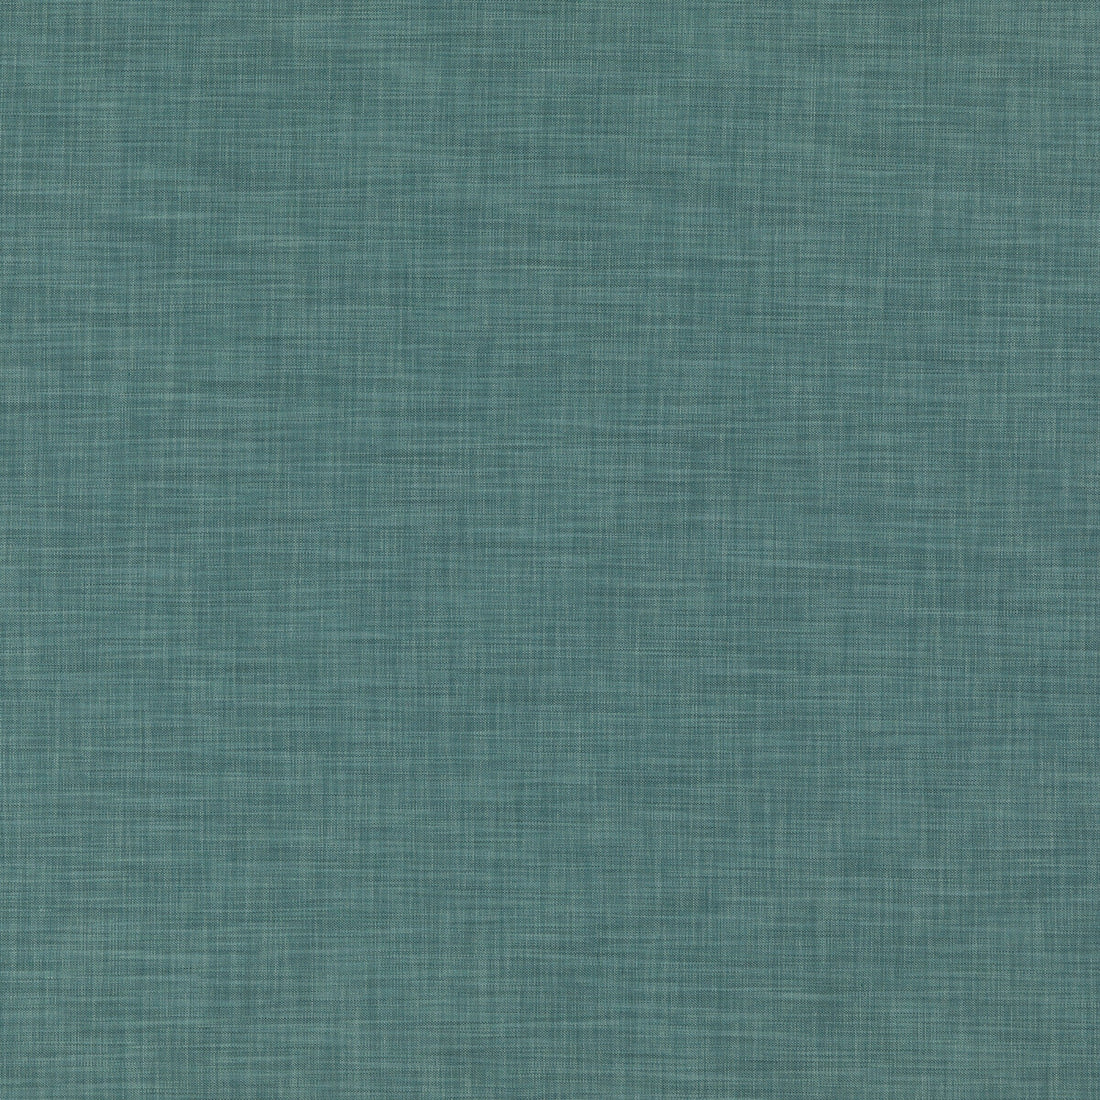 Kalahari fabric in teal color - pattern ED85316.615.0 - by Threads in the Essential Weaves collection